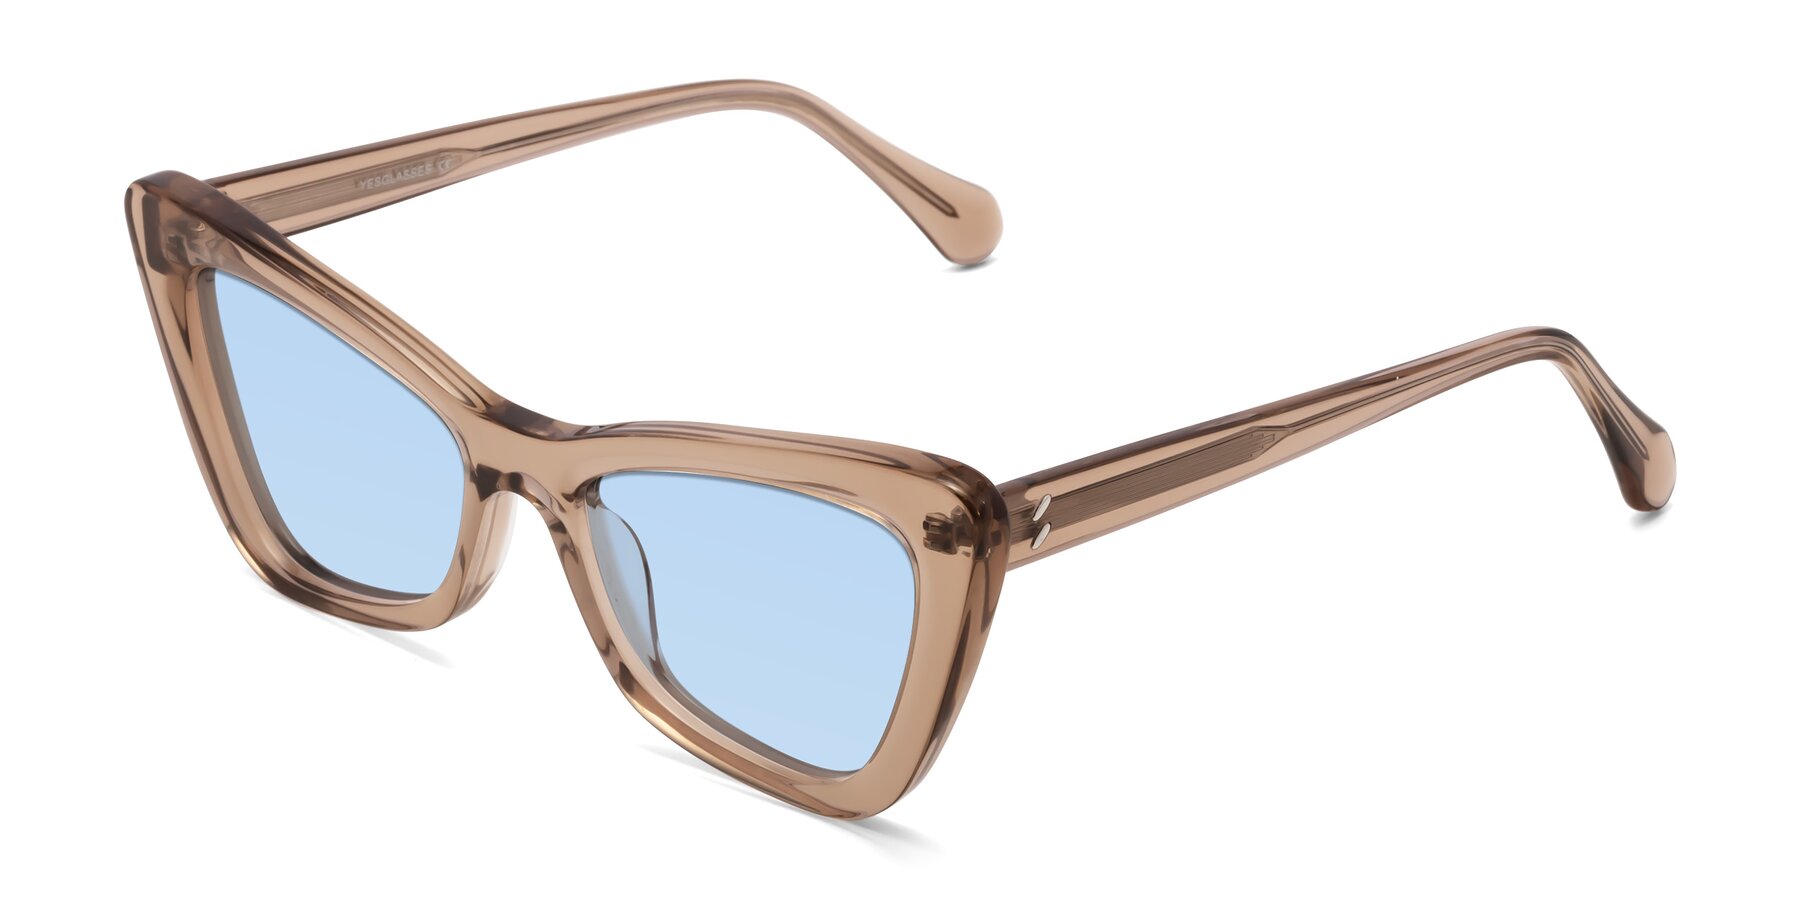 Angle of Rua in Caramel with Light Blue Tinted Lenses